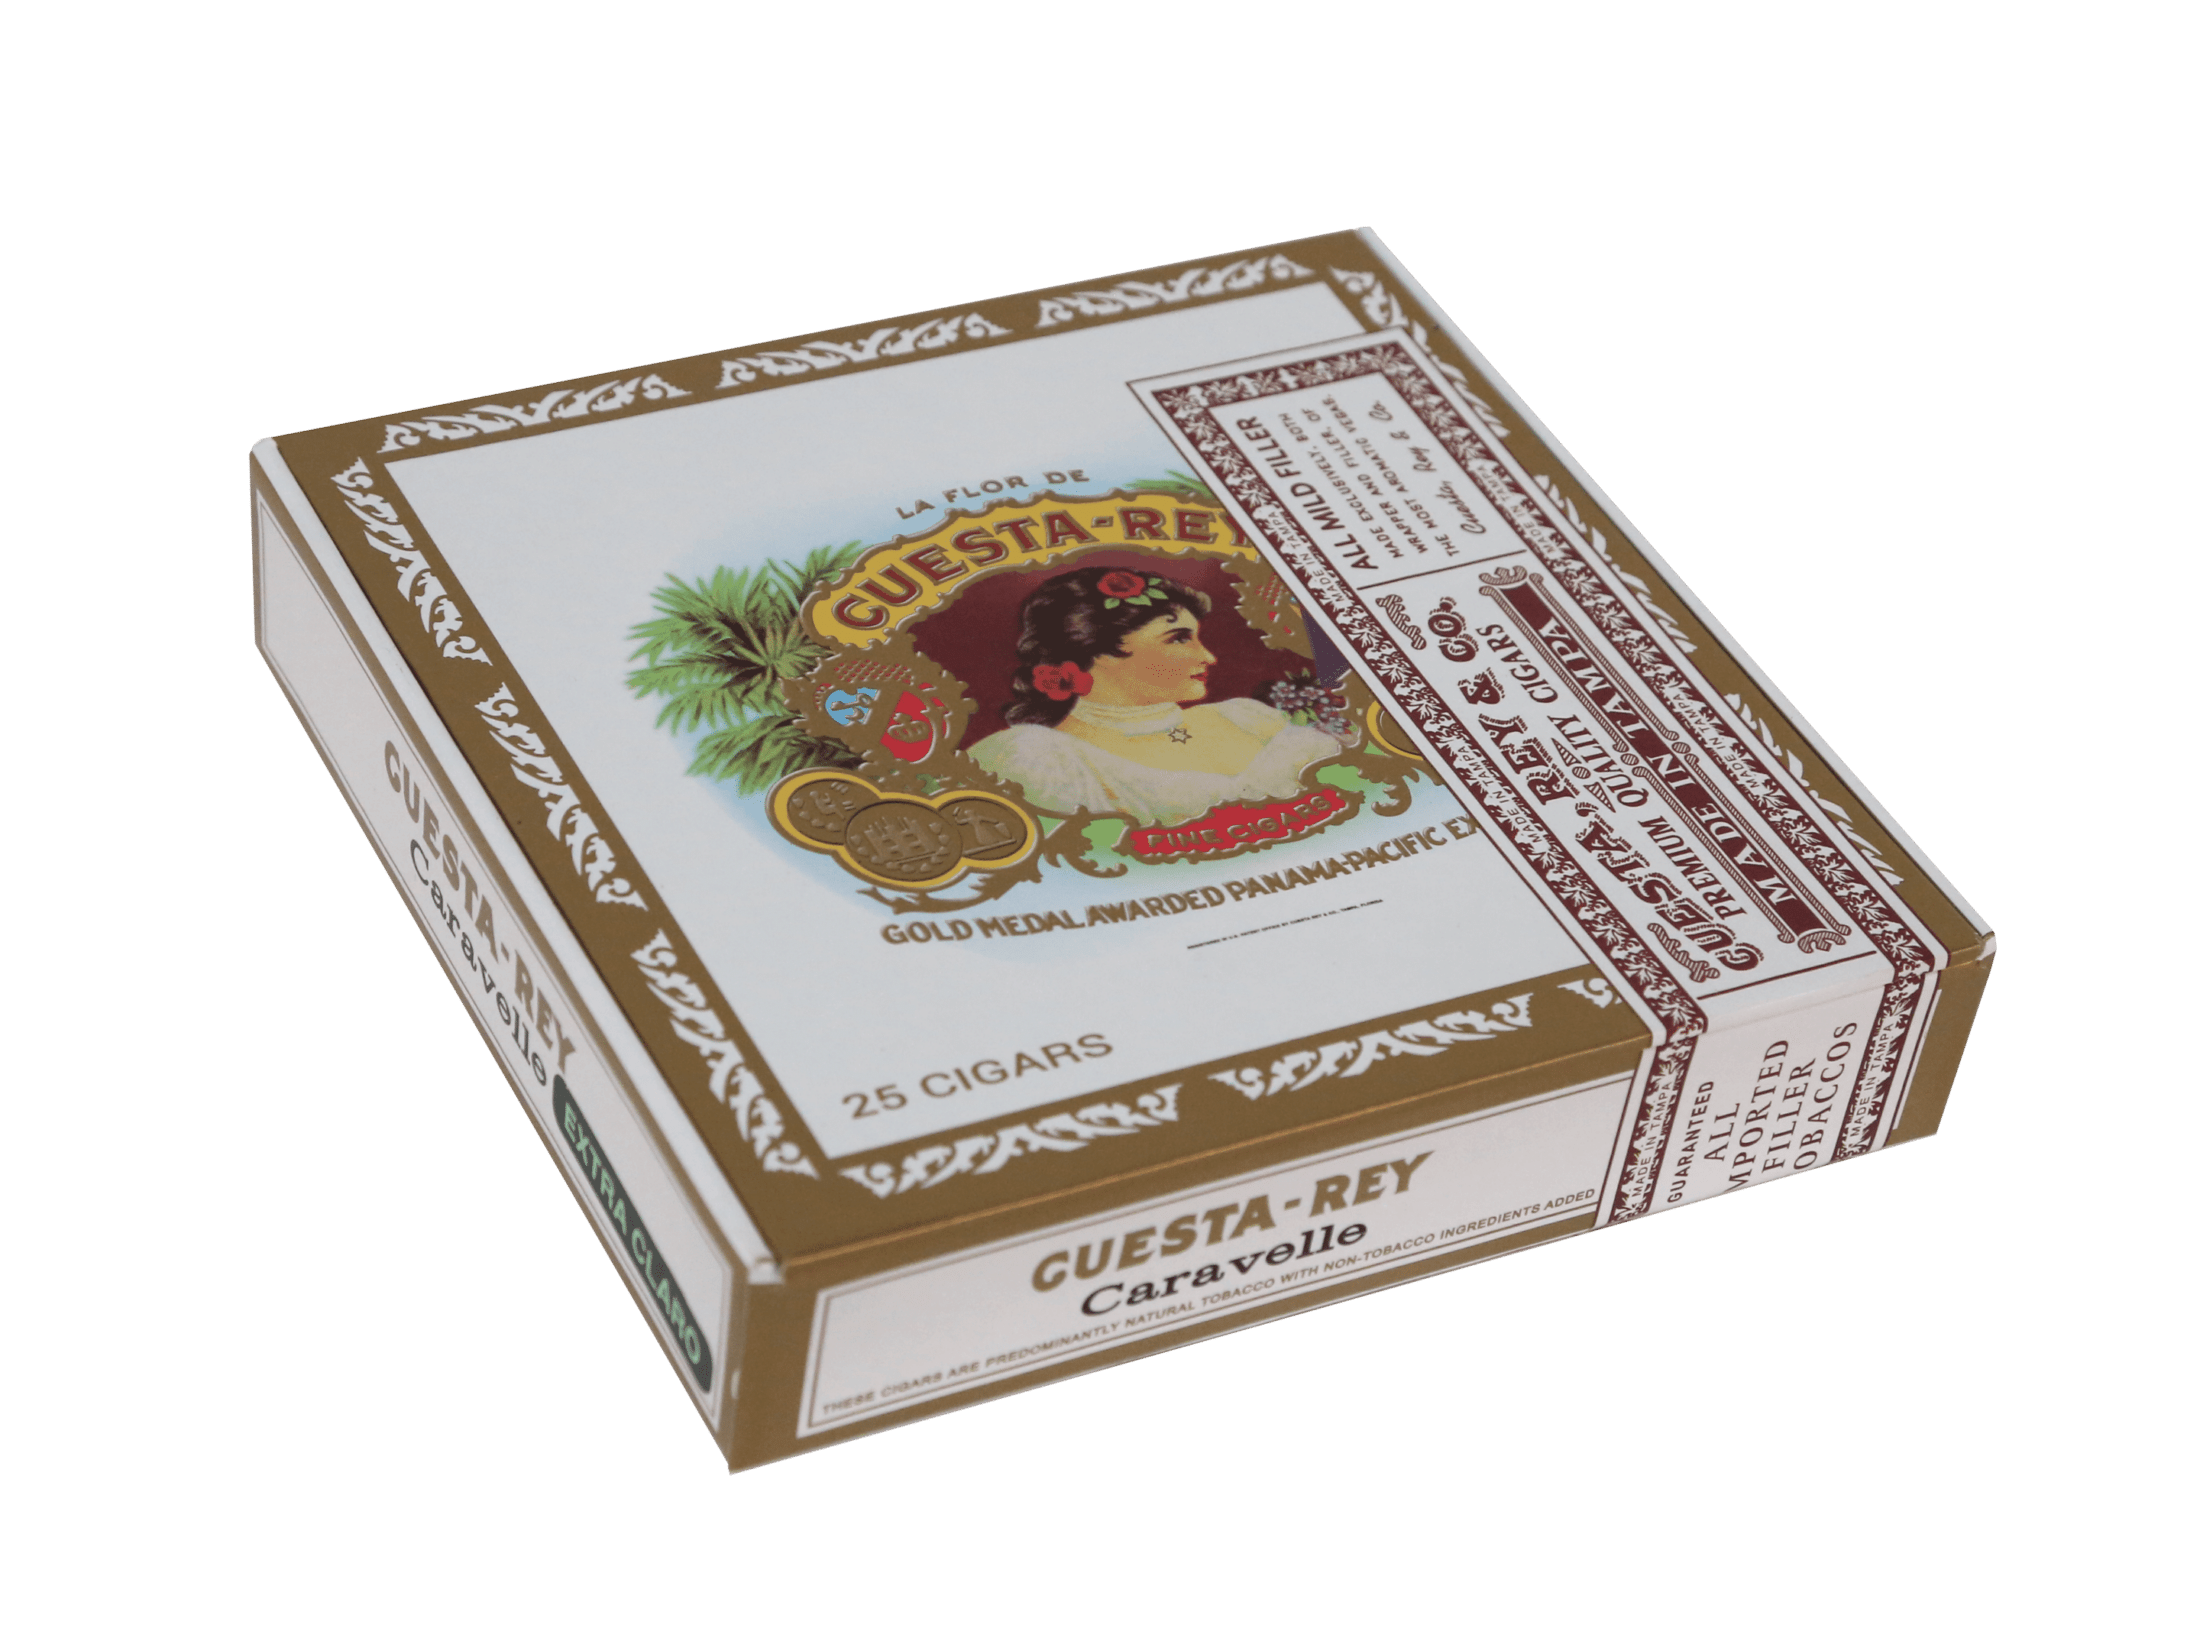 Closed box of 25 count Cuesta Rey Caravelle cigars